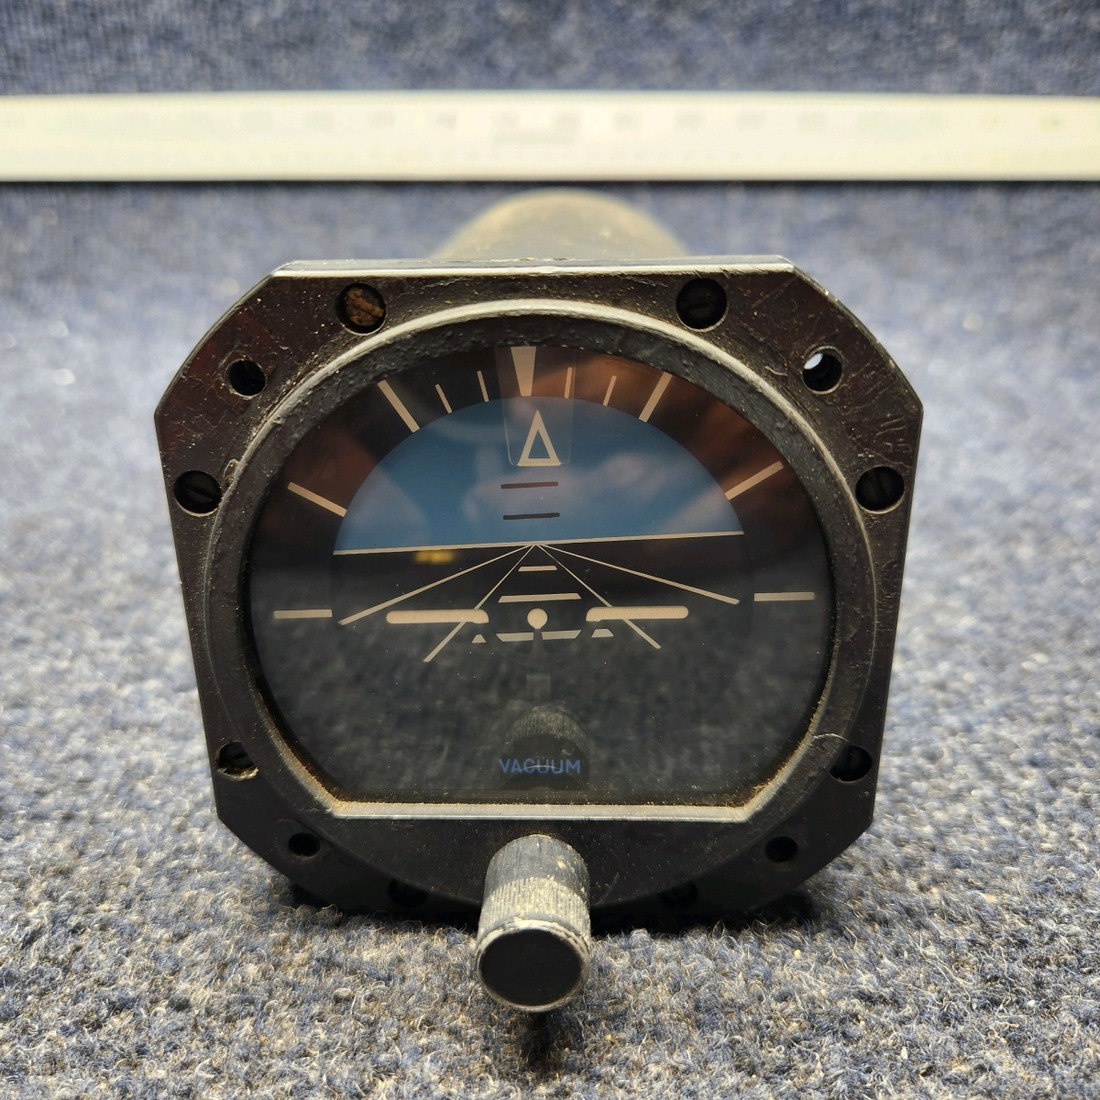 Used aircraft parts for sale, C661076-0101 PIPER PA28-140 CESSNA EDO-AIRE ATTITUDE INDICATOR GYRO